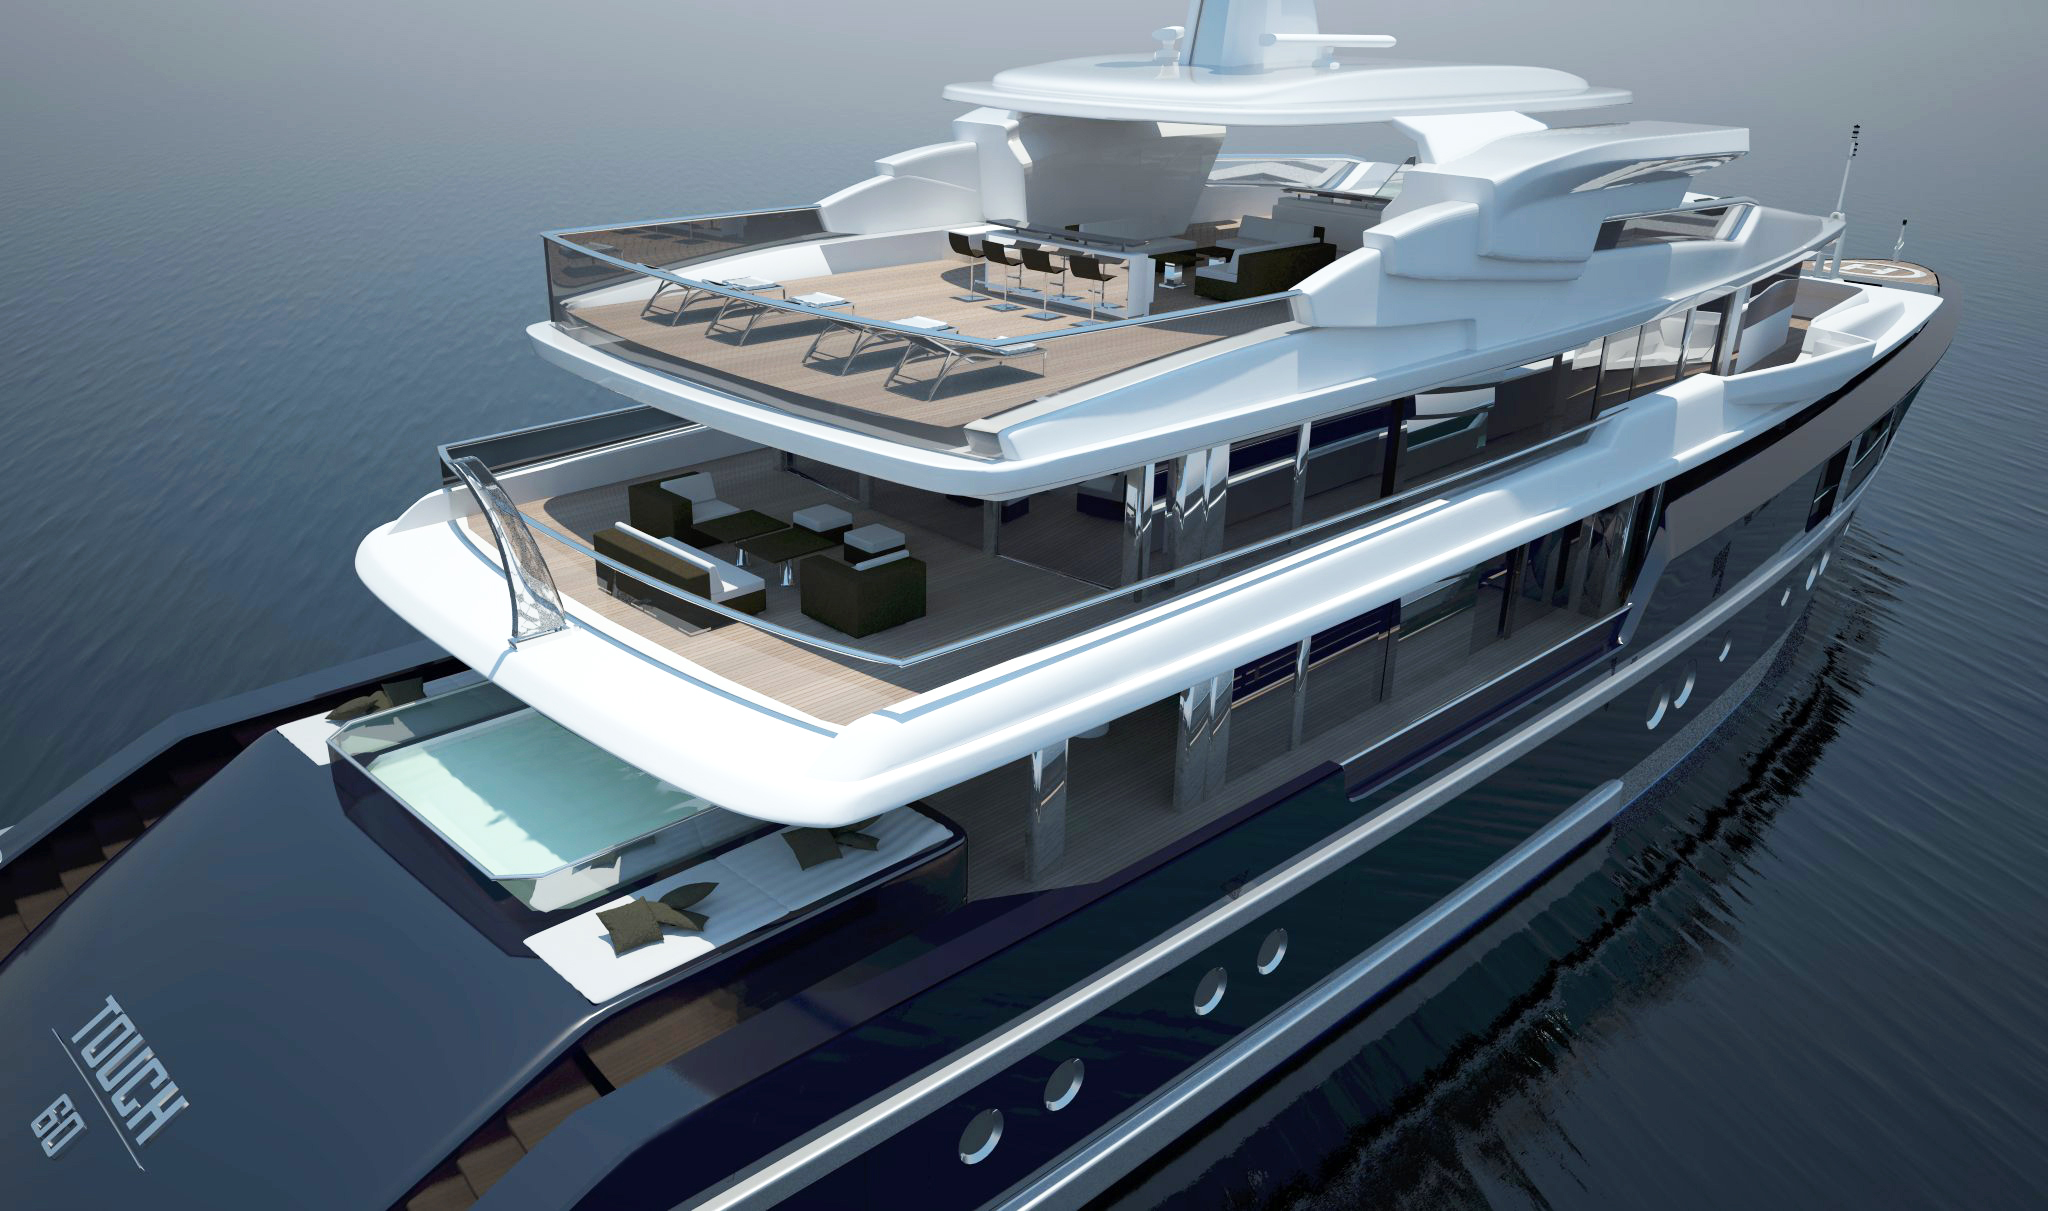 60m Touch yacht concept designed by Newcruise - Aft view.